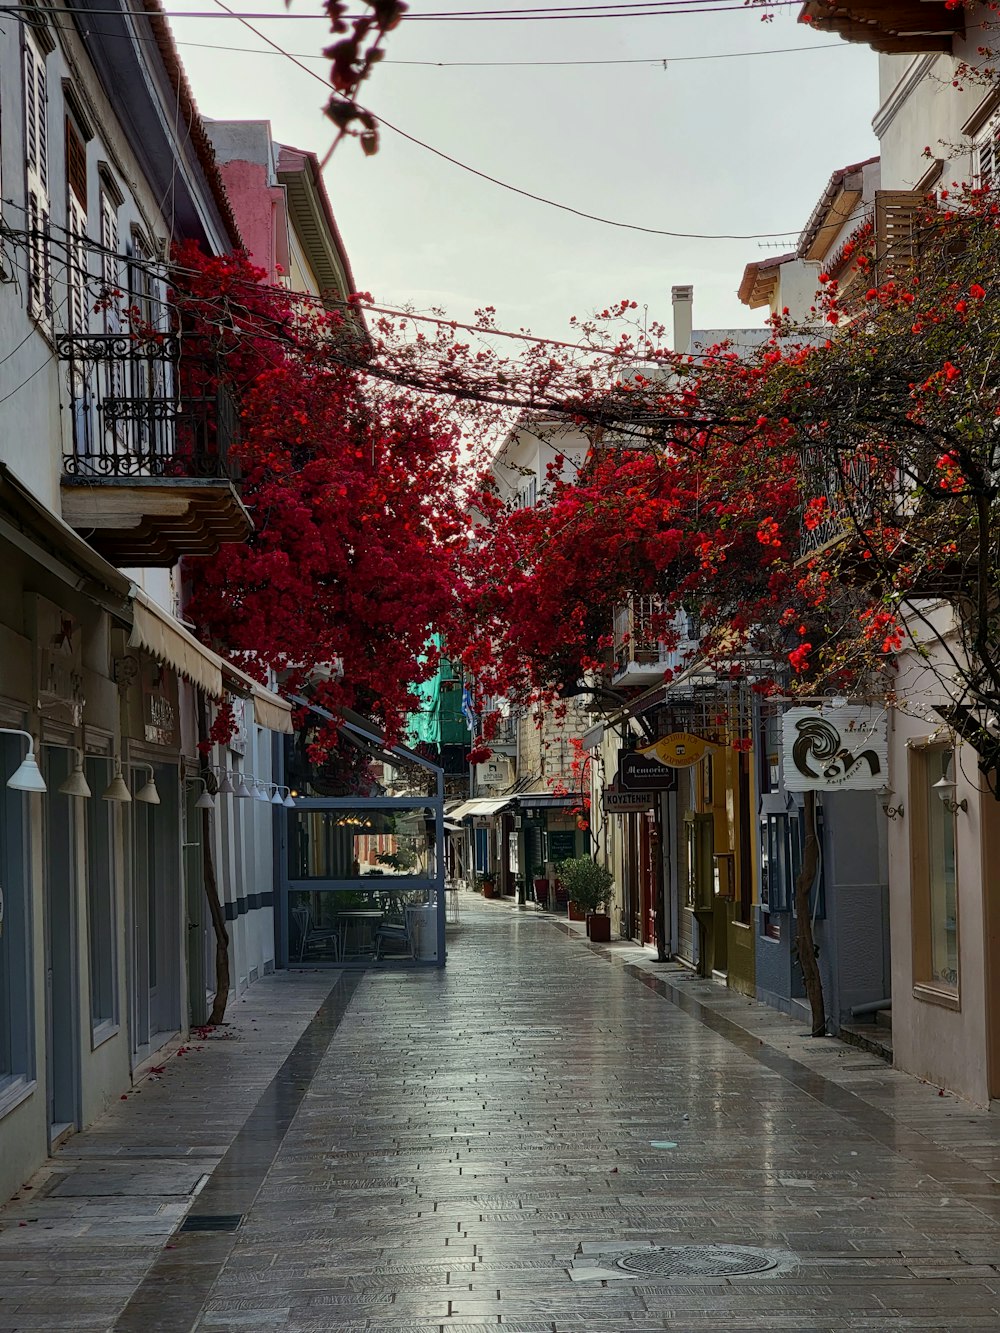 a city street with red flowers on the trees